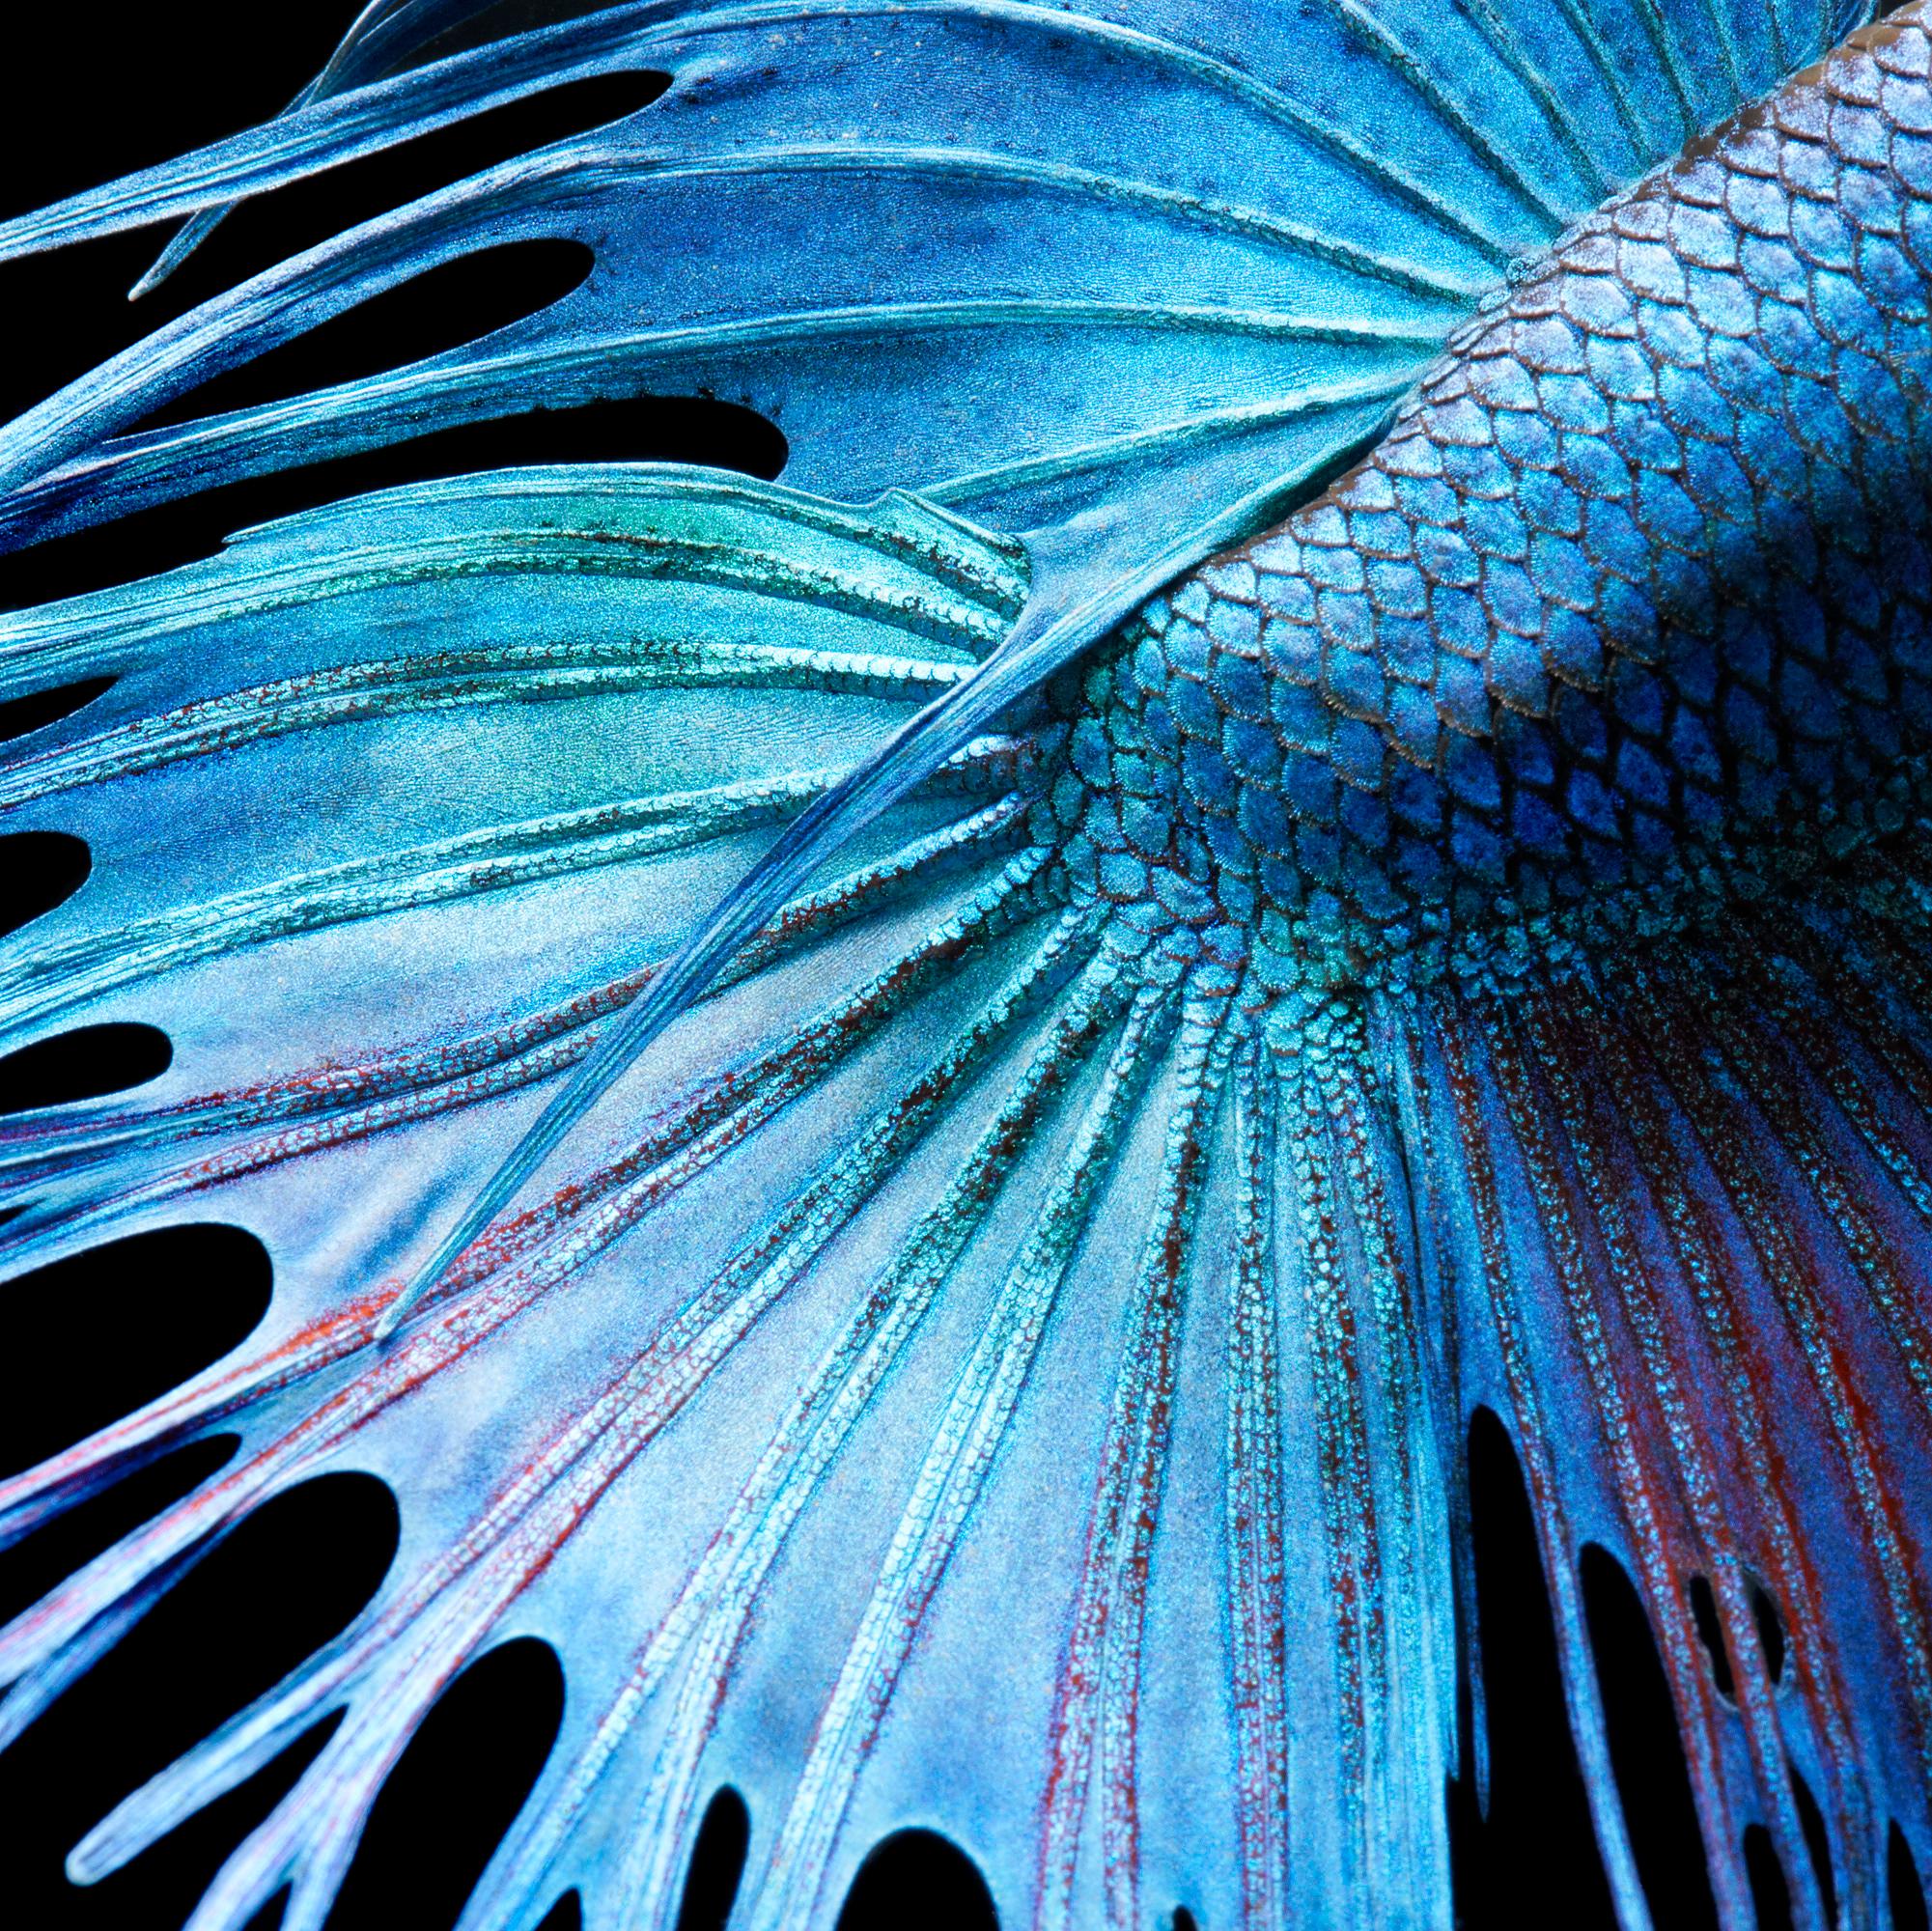 Please bear in mind that all prints are produced to order. Lead times are expected between 15-20 days.

'Fighting Fish Abstract' is a stunning C-Type print by contemporary British photographer Tim Flach available in this size in Edition 2/10. This